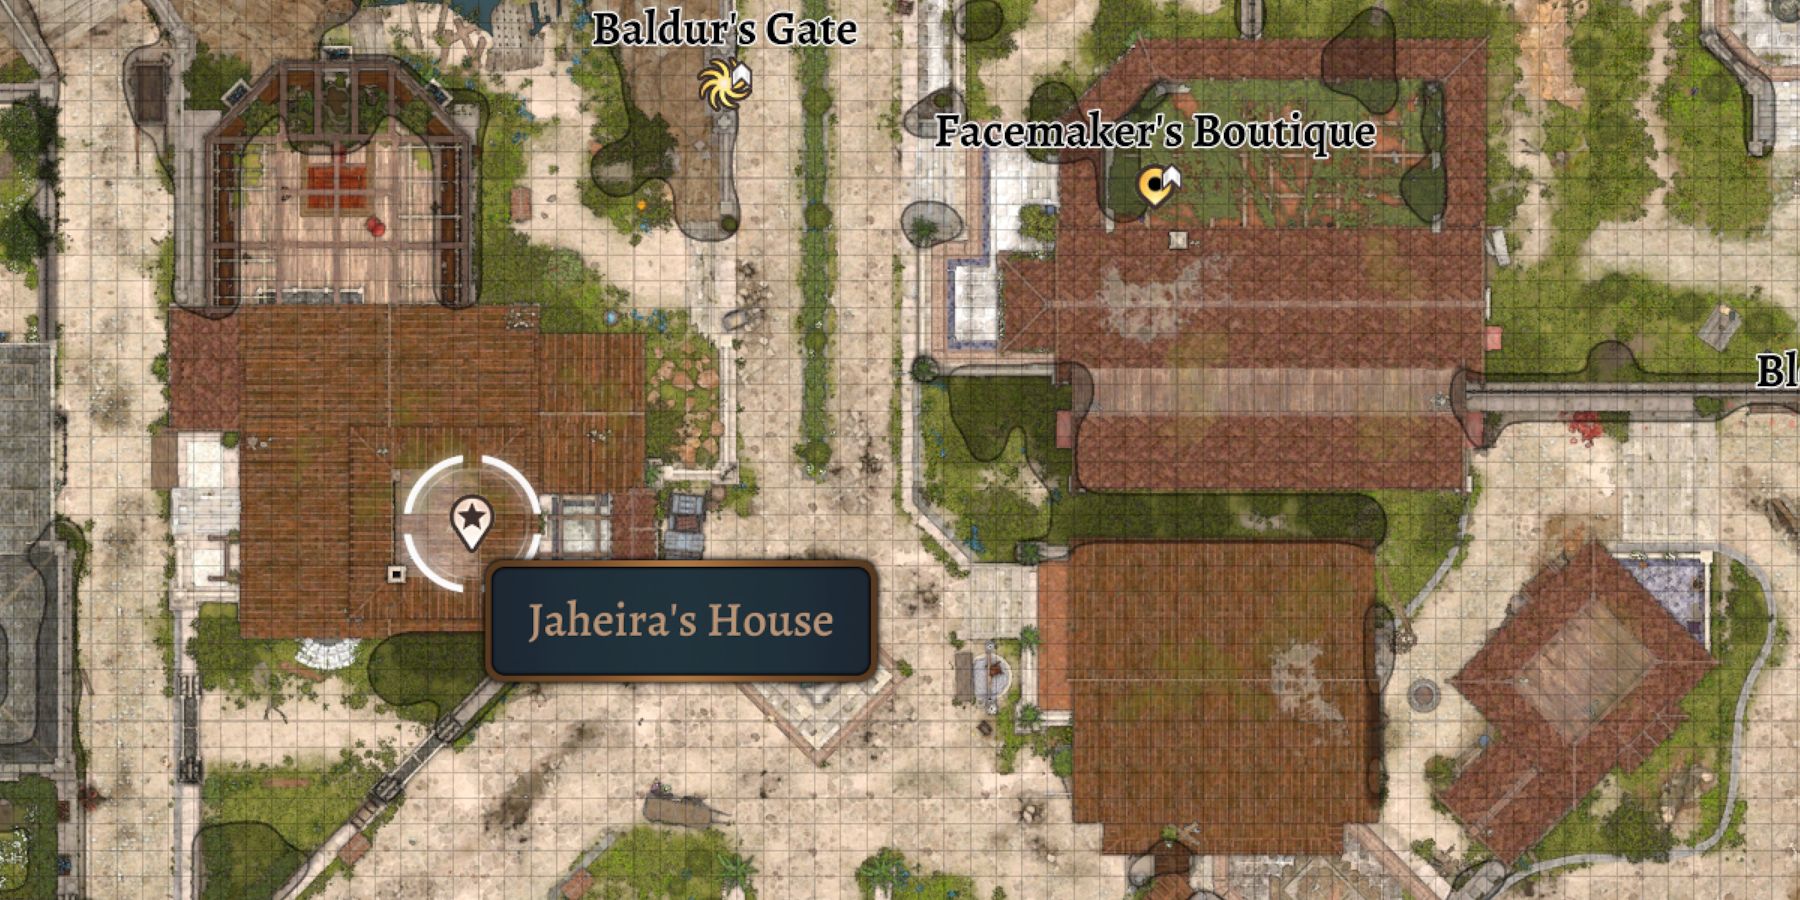 The map displays Jaheira House nearby the Baldur's Gate fast travel